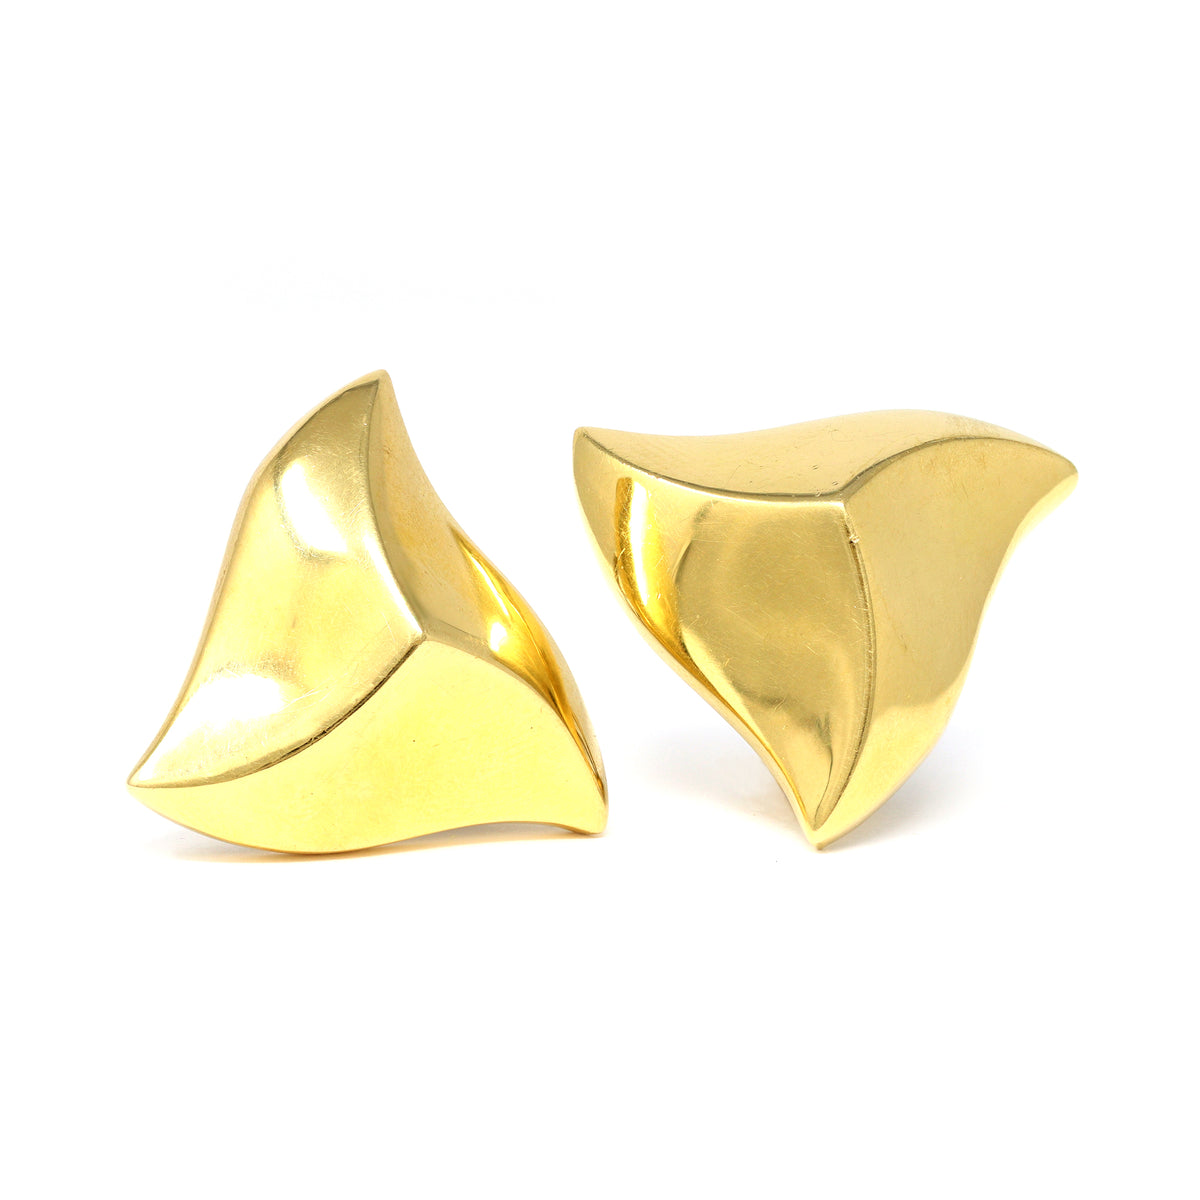 Signed Angela Cummings Pyramidal Clip On Earrings in 18 Karat Yellow Gold up and down view 